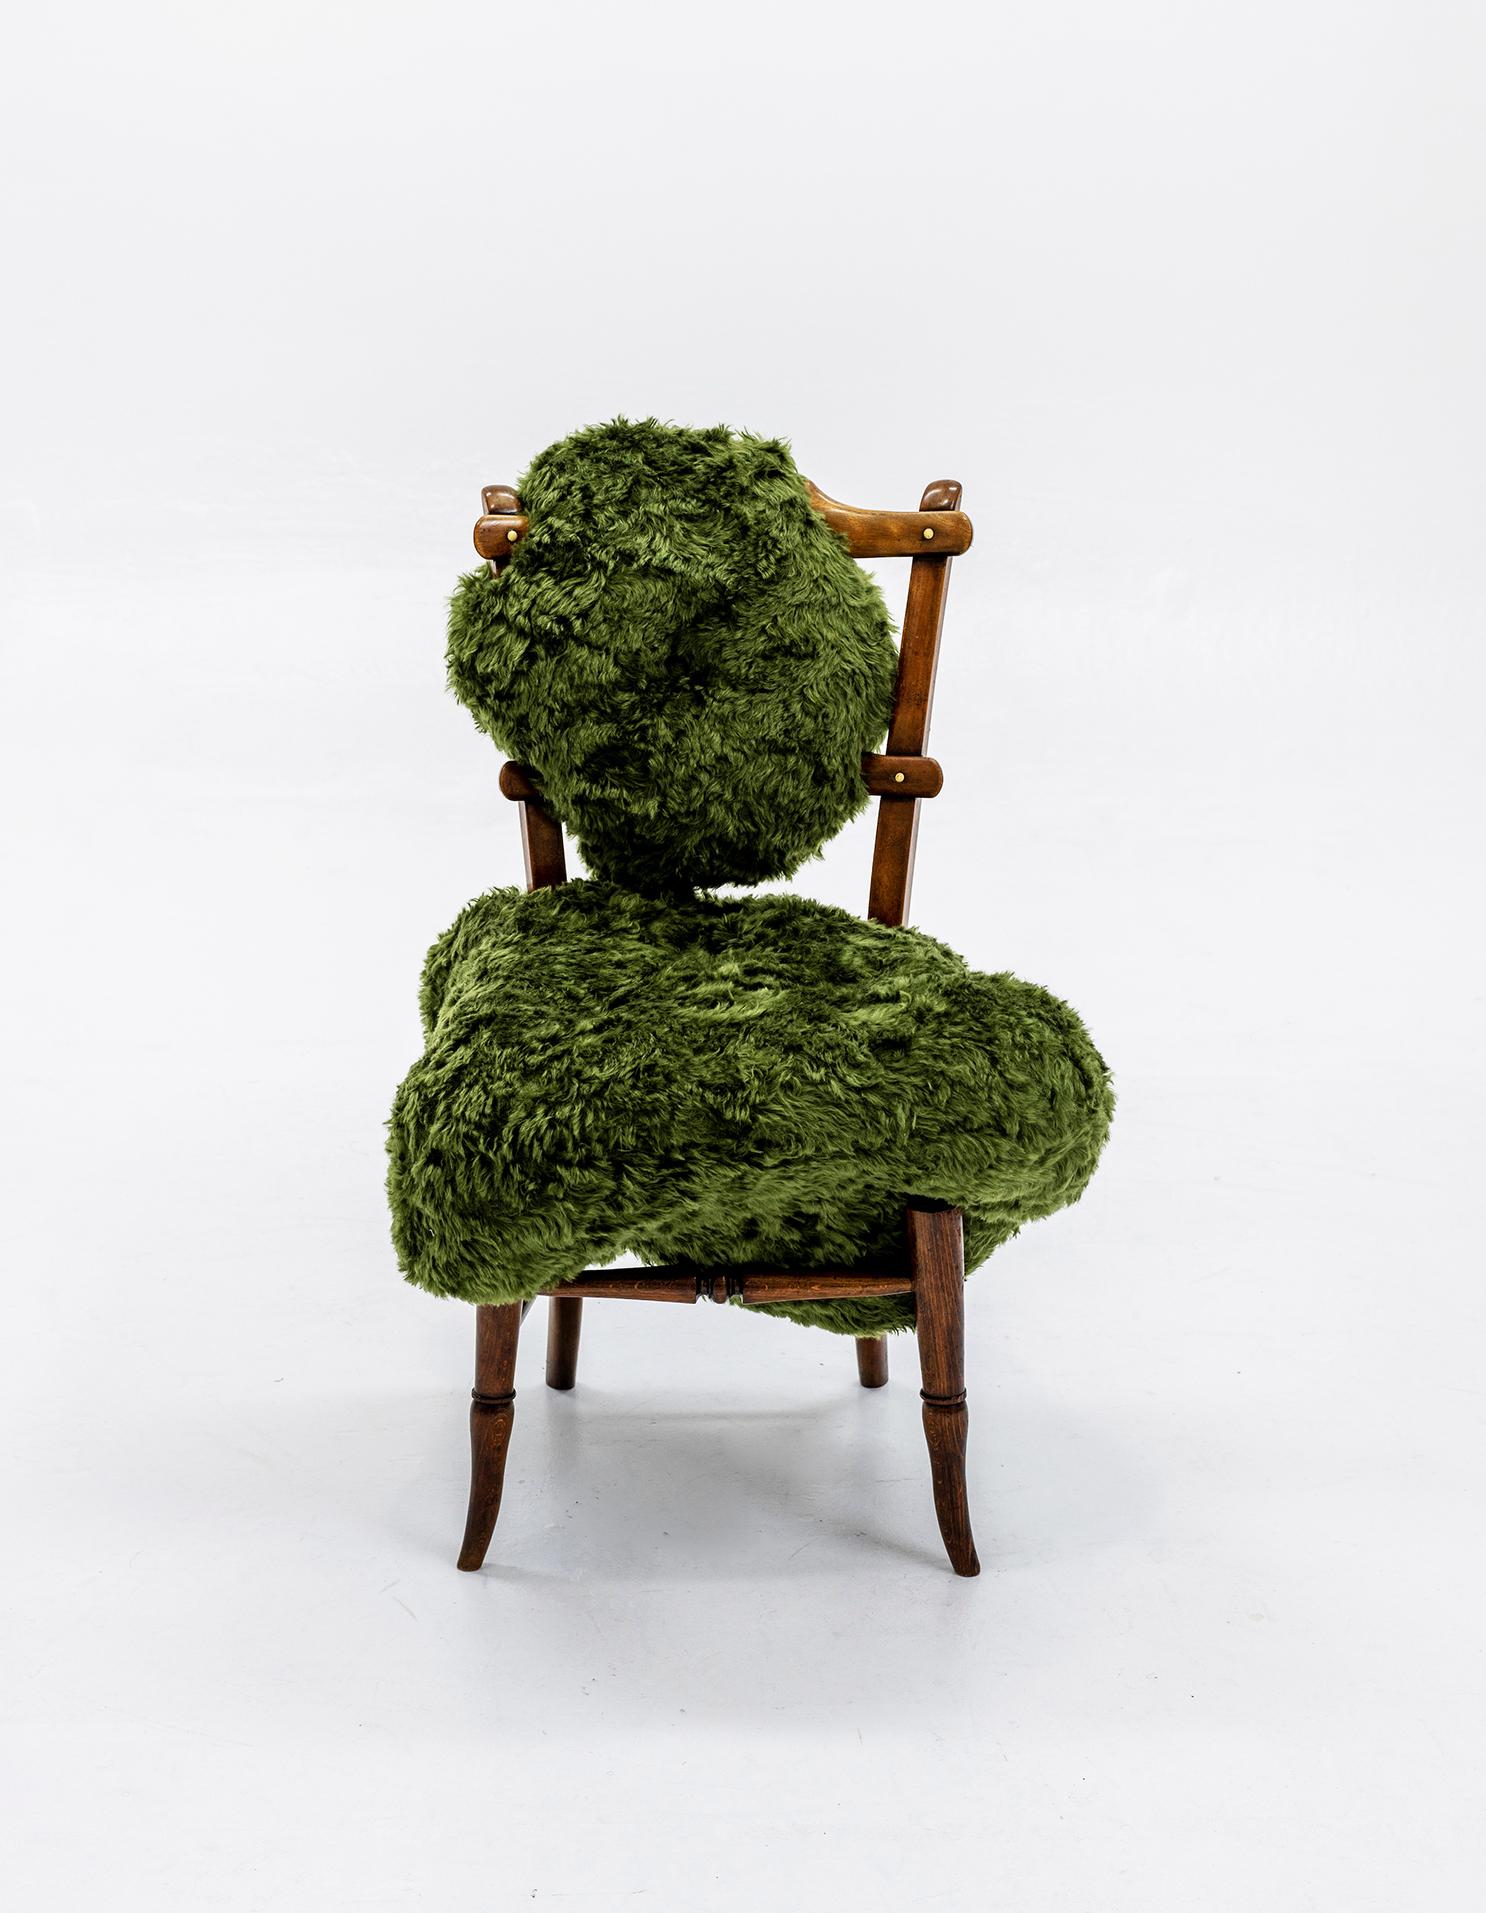 Part of the Hi!breed family, this chair is sculpted from a repaired Victorian bedroom chair and biomorphic upholstery. This series of chairs explore polarizing themes surrounding object and subject, hard and rigid, soft and malleable and also the